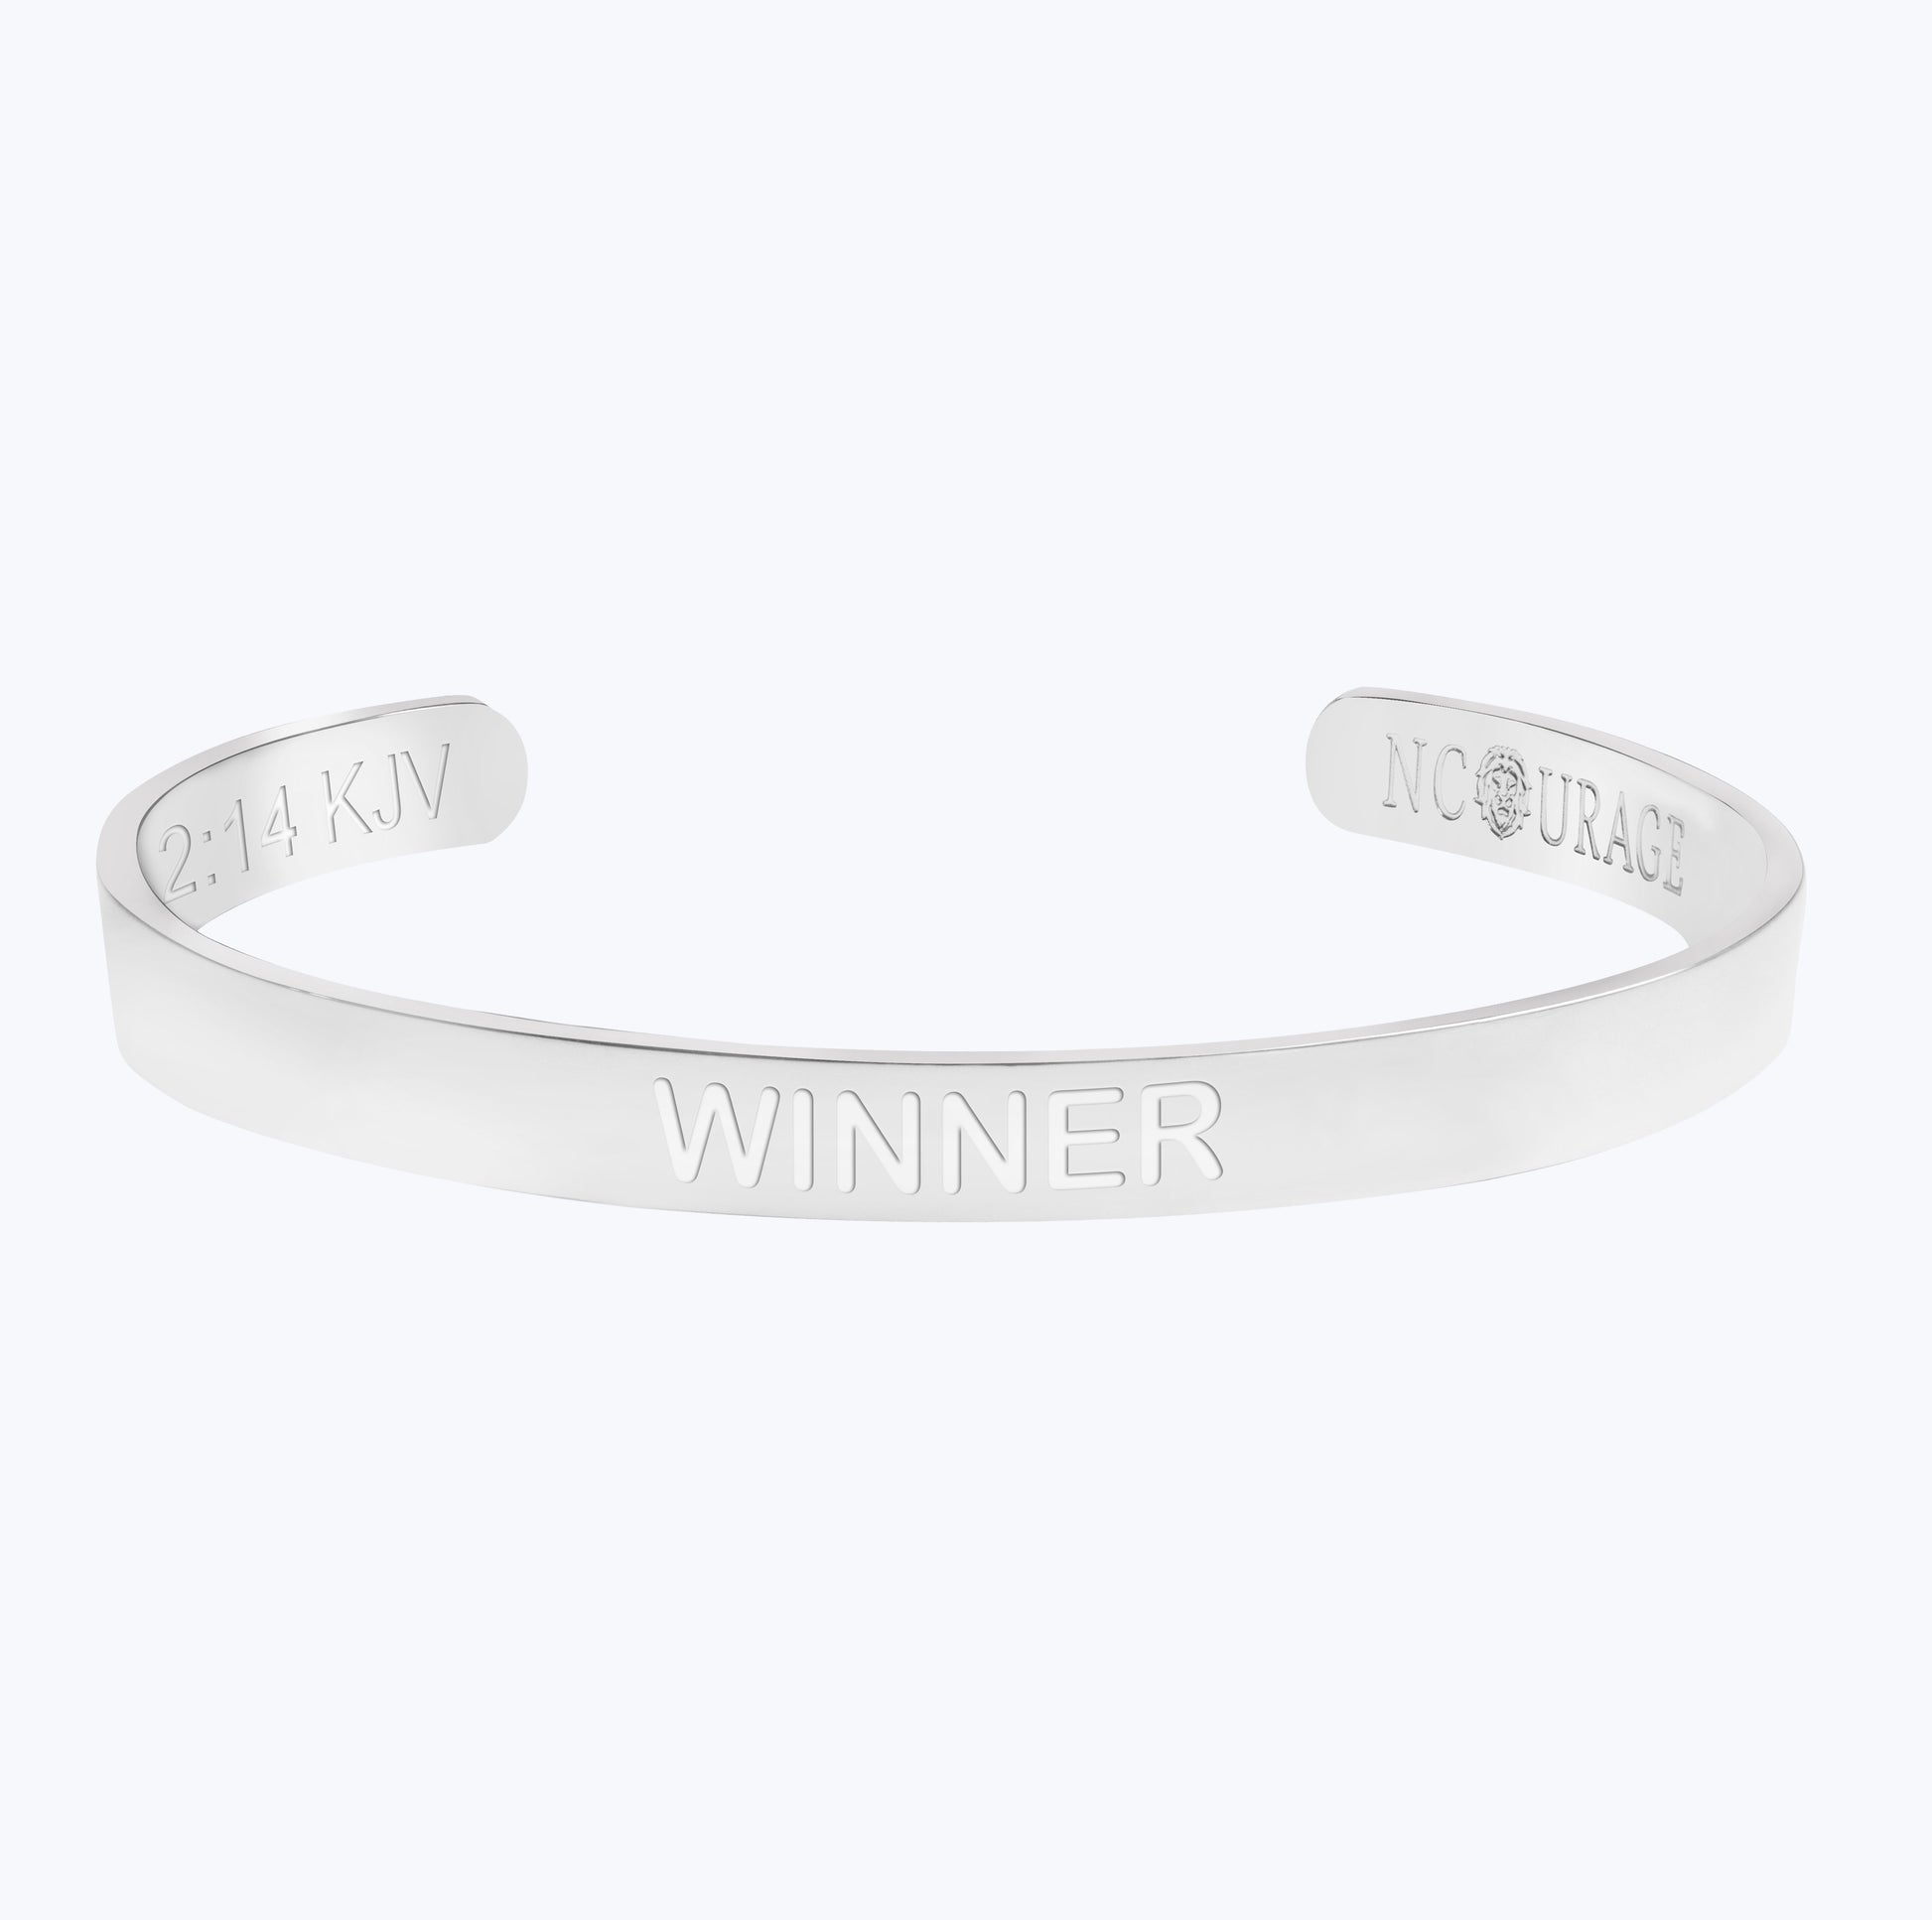 WINNER (7mm) - NCOURAGE Bands and Bracelets